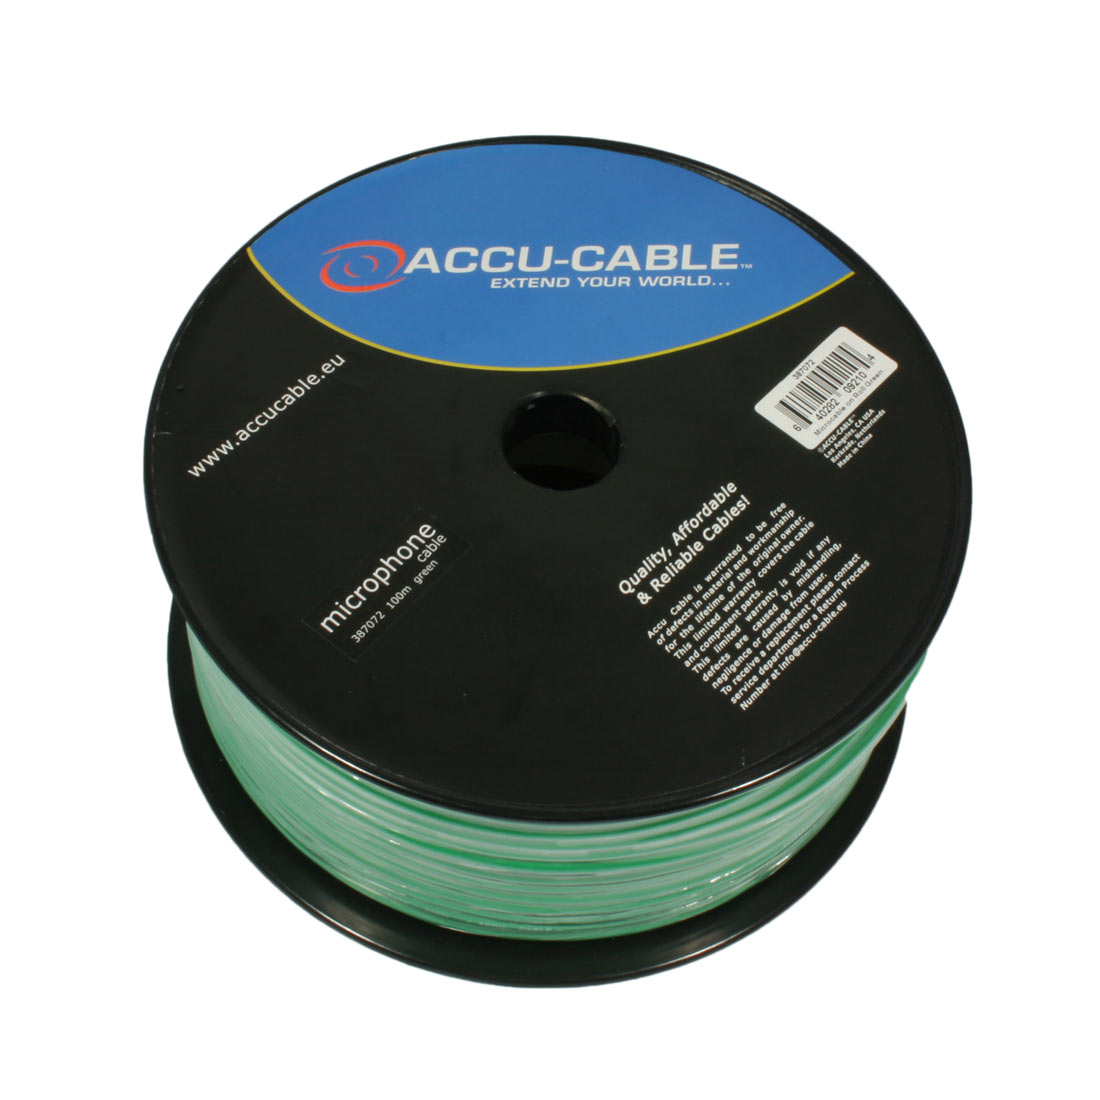 Accu Cable AC-MC/100R-G Microcable roll 100m, green